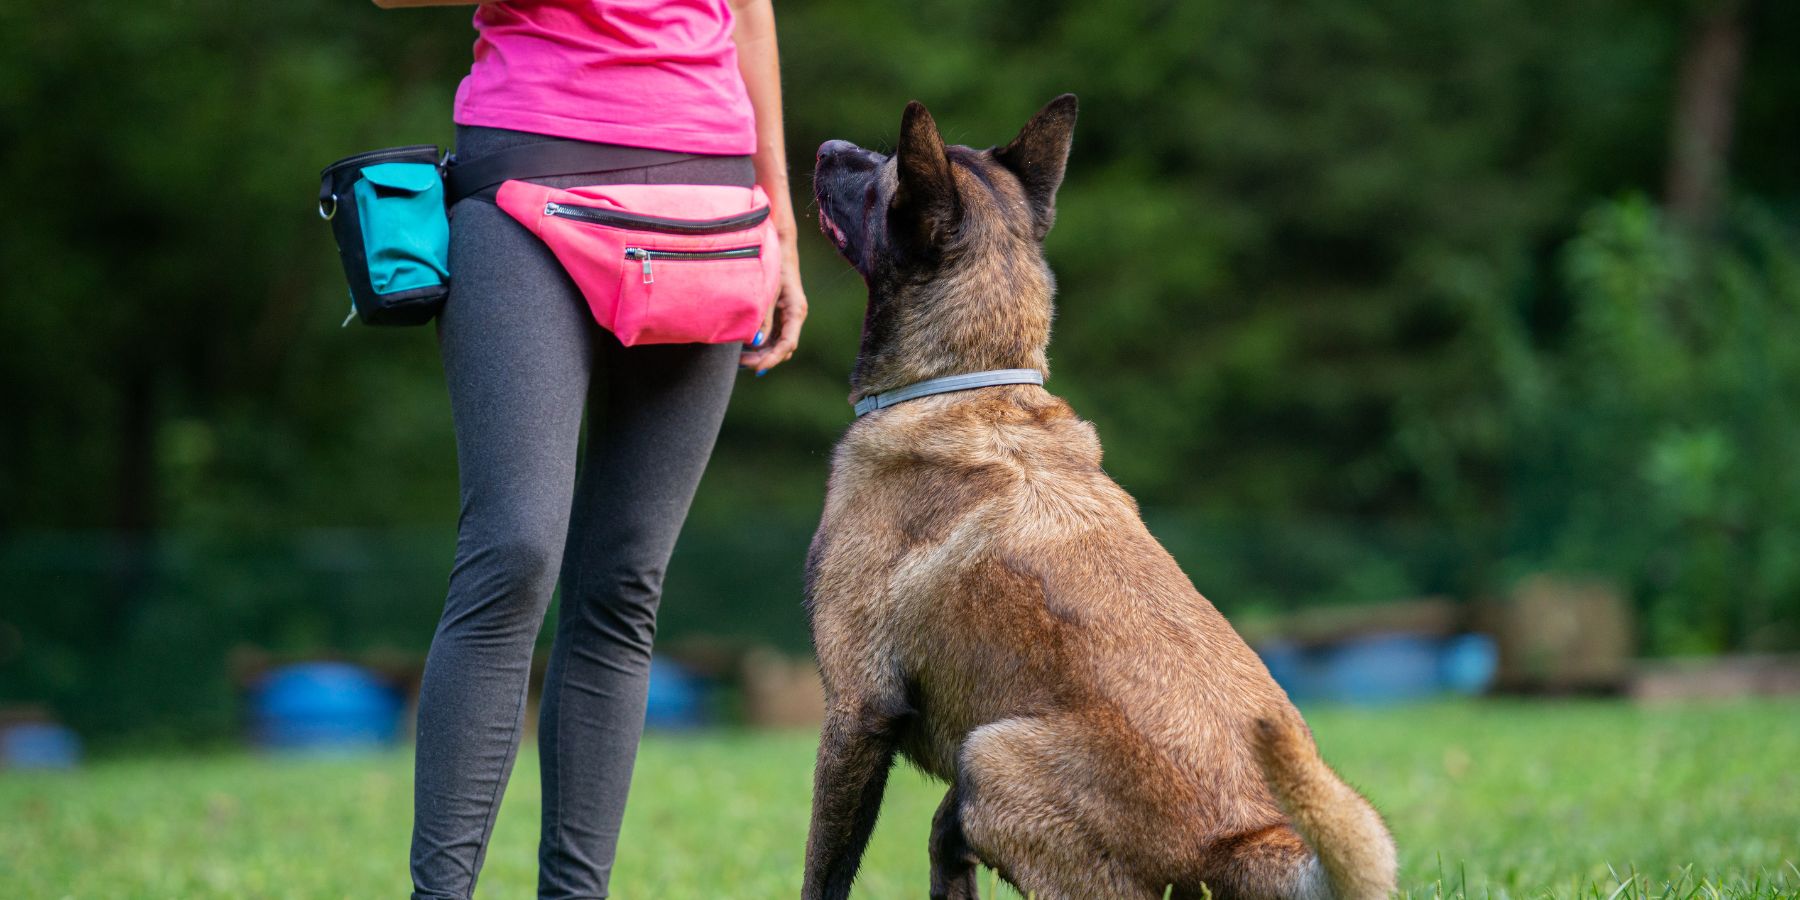 Are There Quick Tips for Mastering Common Dog Commands?